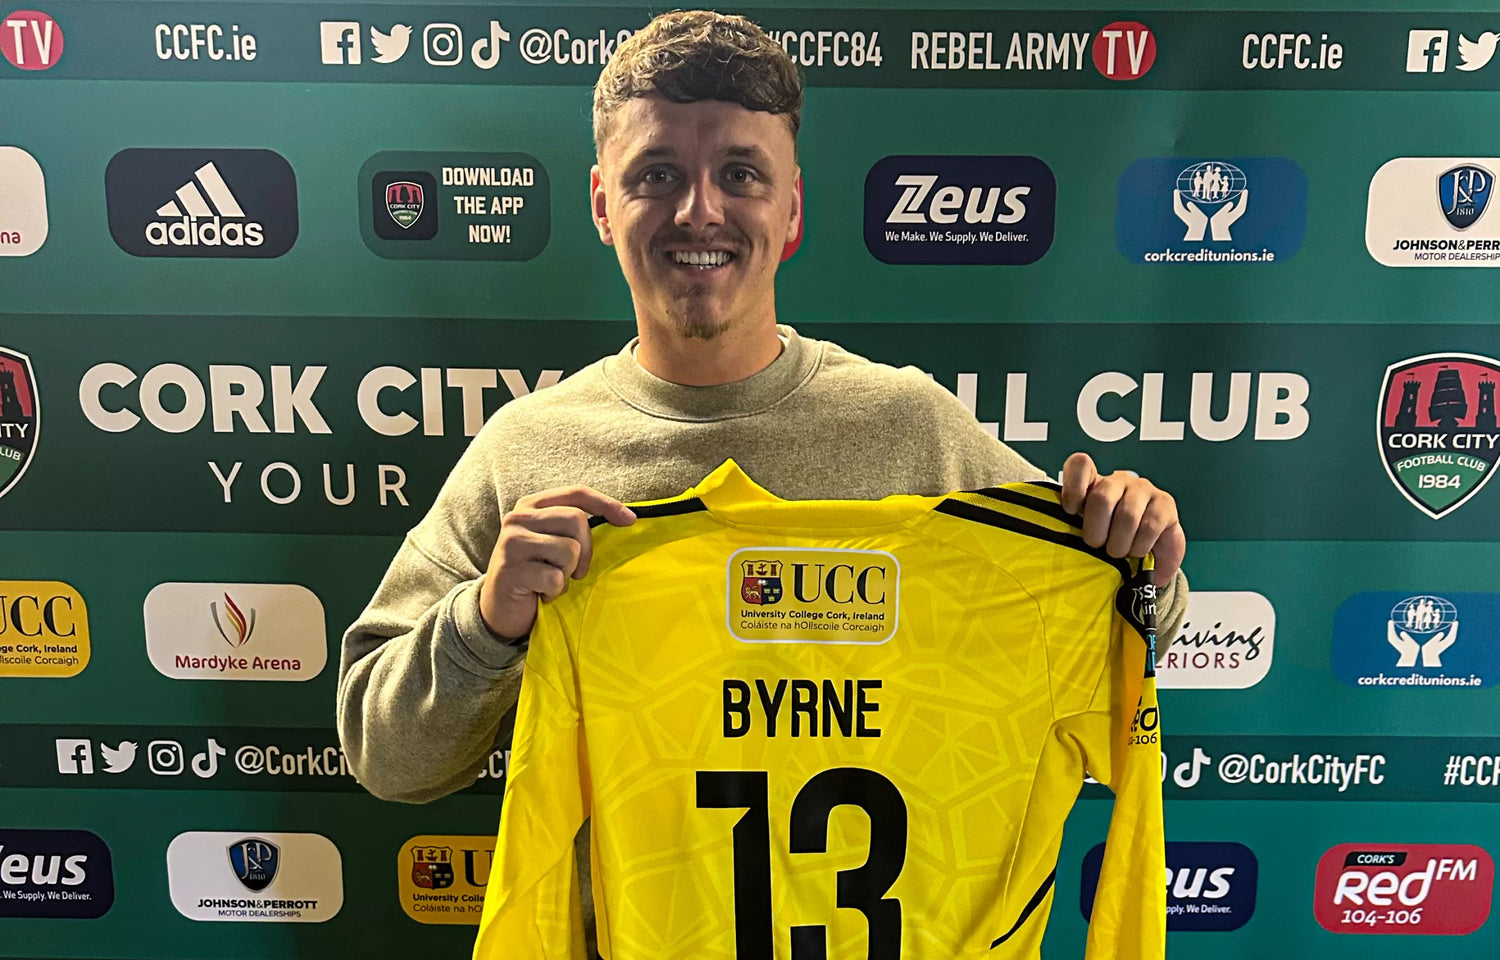 Ollie Byrne signs for City!